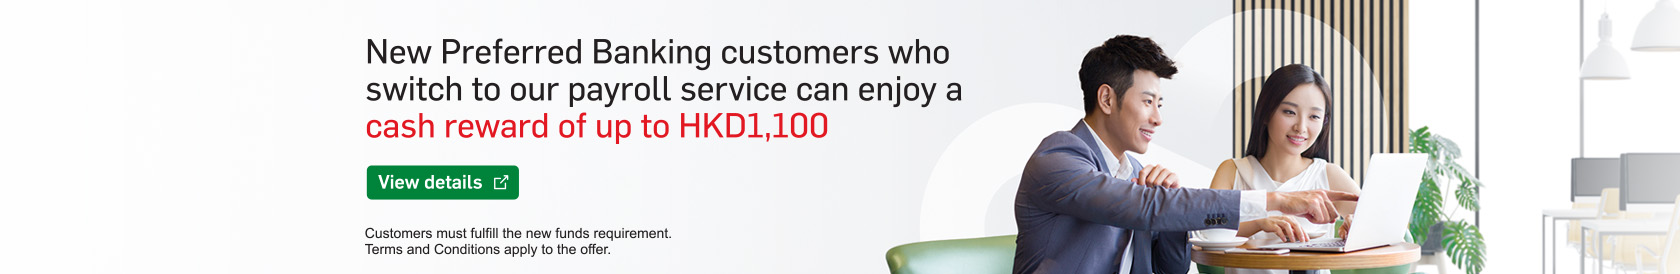 New Preferred Banking customers who switch to our payroll service can enjoy a cash reward of up to HKD1,100